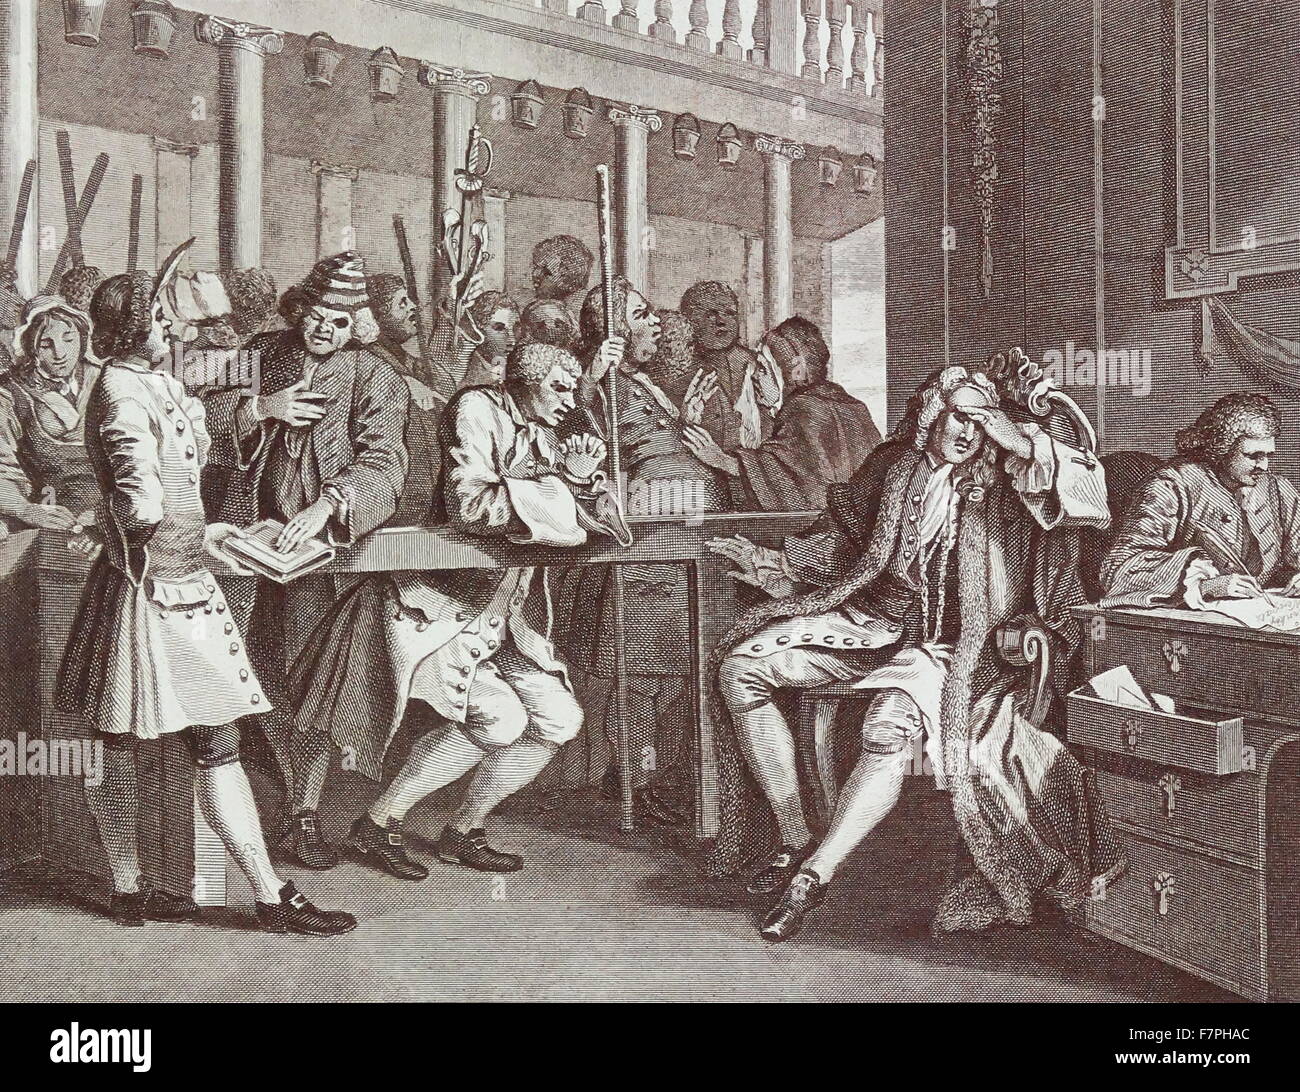 Engraving titled 'Industry and Idleness' by William Hogarth (1697-1764) English painter, printmaker, pictorial satirist, social critic, and editorial cartoonist who has been credited with pioneering western sequential art. Dated 18th Century. Stock Photo